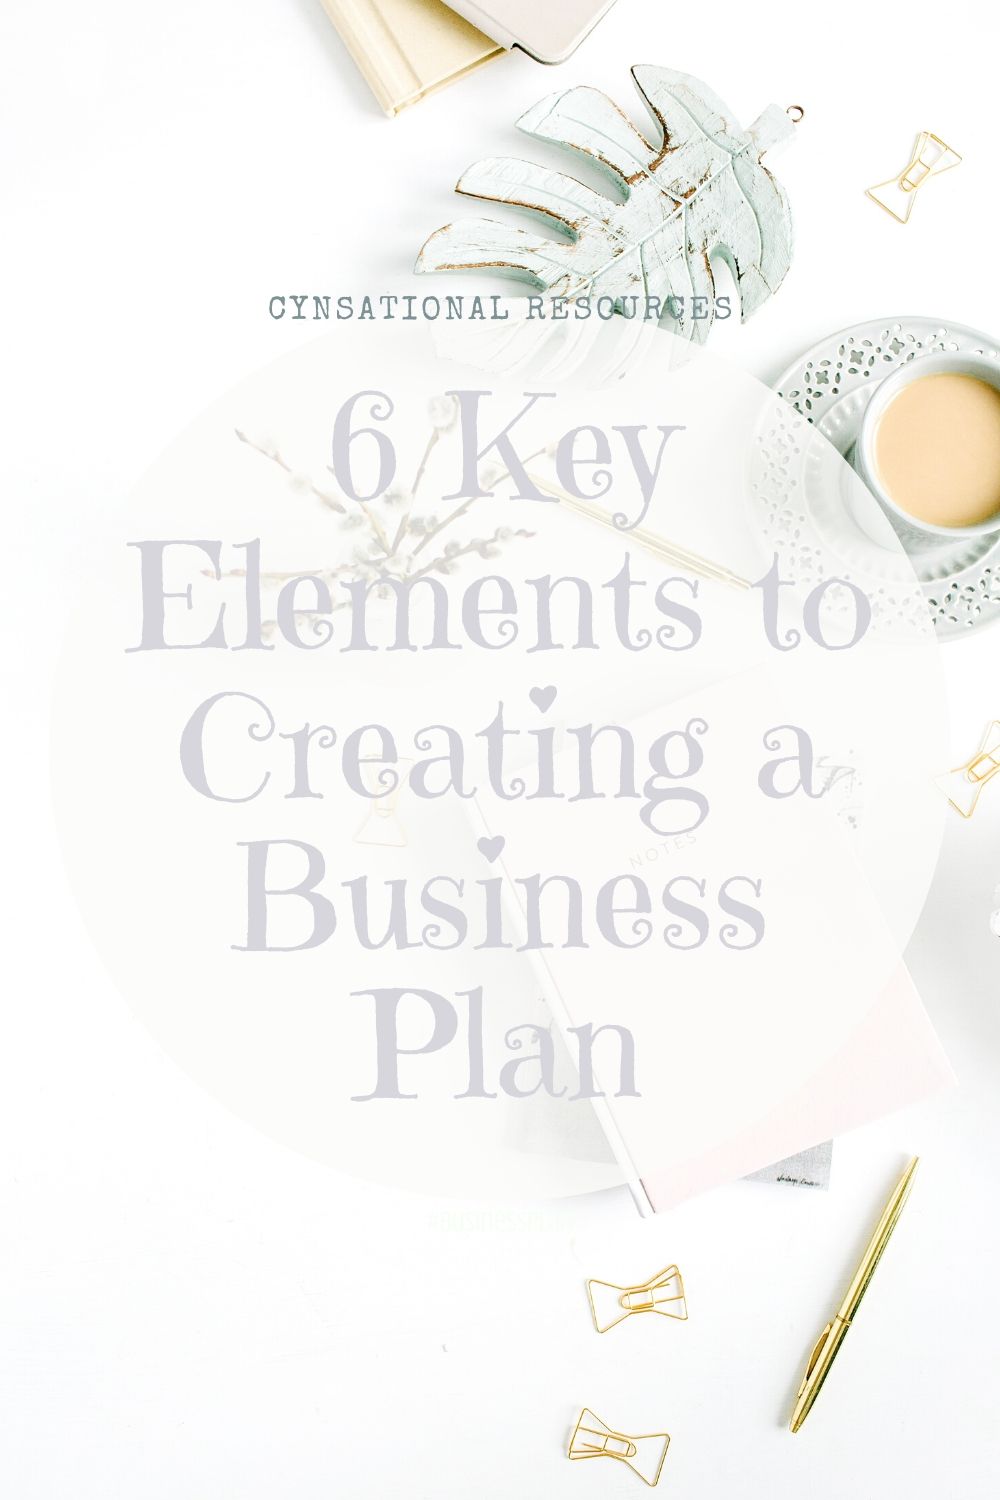 6 Key Elements to Creating a Business Plan